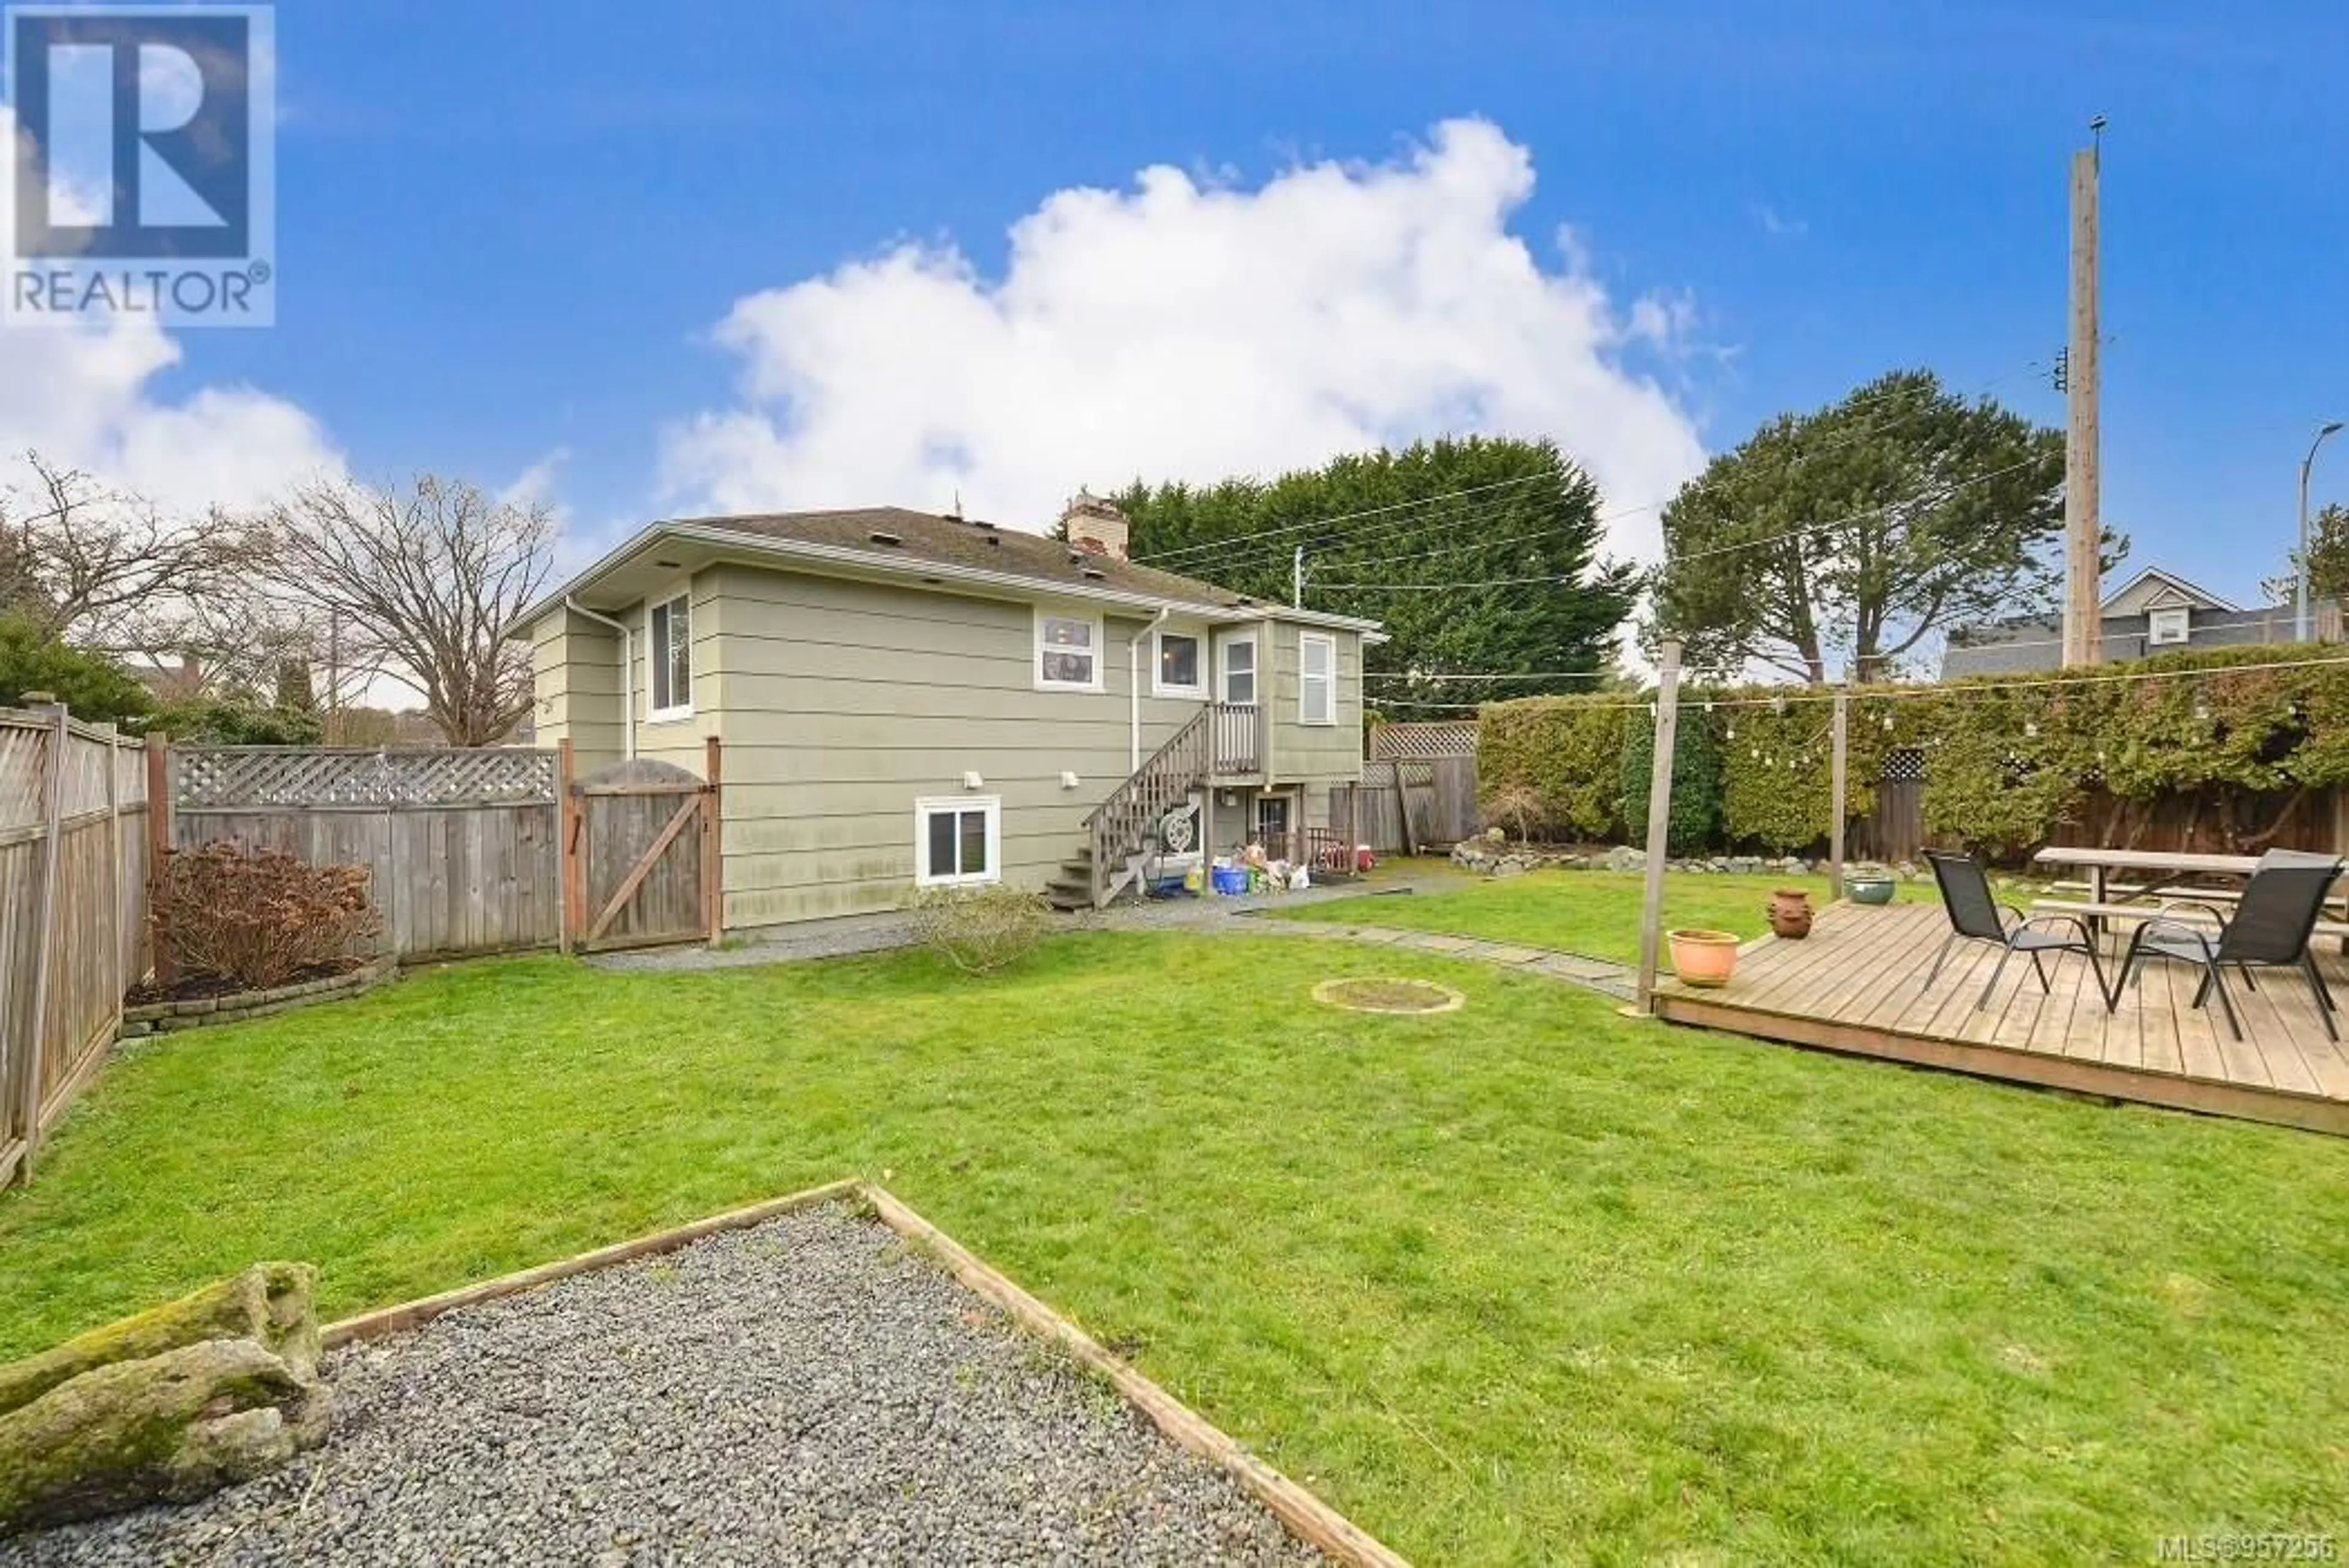 Fenced yard for 1700 Albert Ave, Victoria British Columbia V8R1Z1